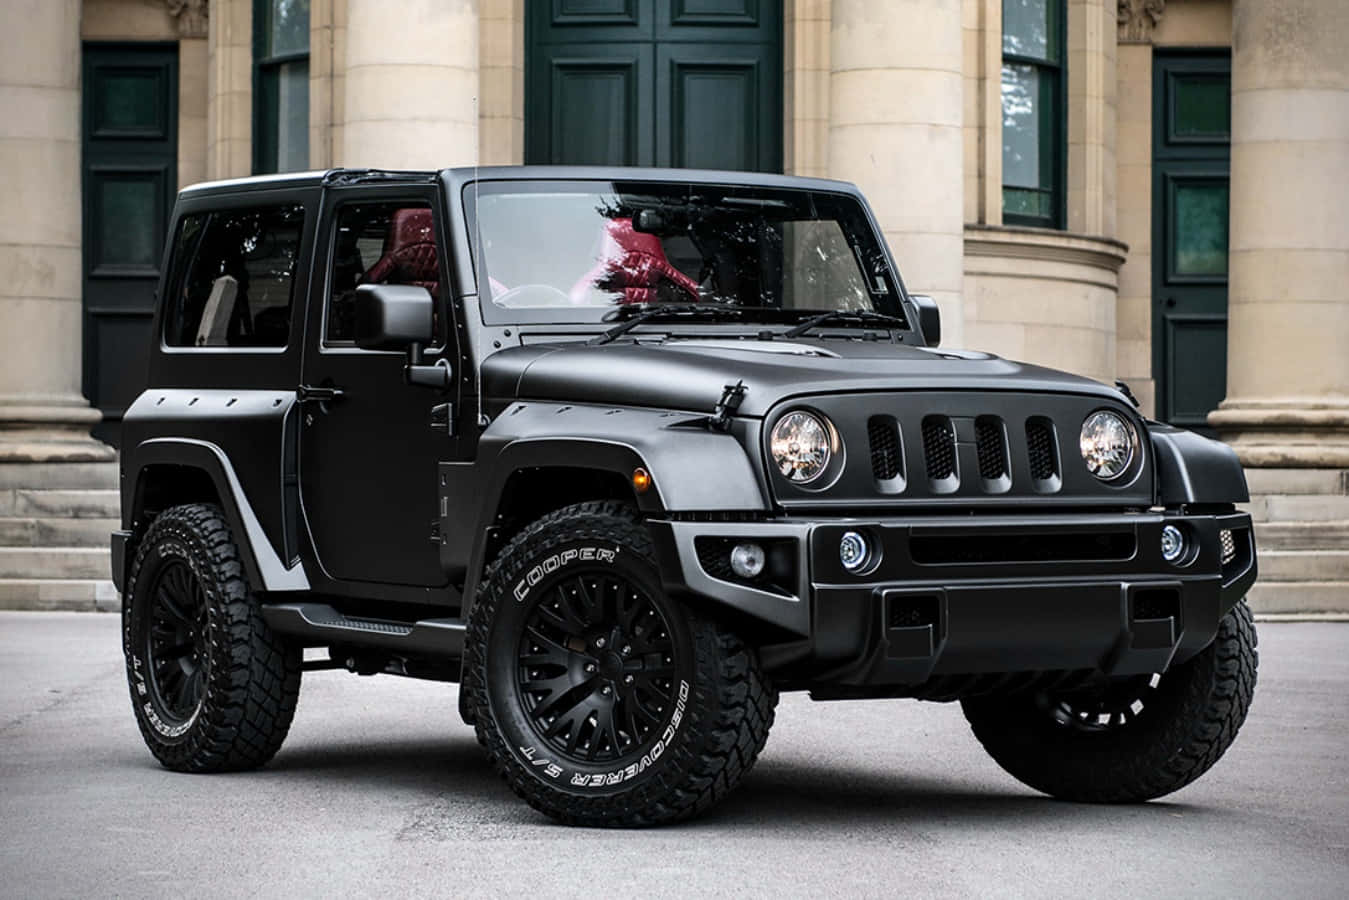 A Black Jeep Parked In Front Of A Building